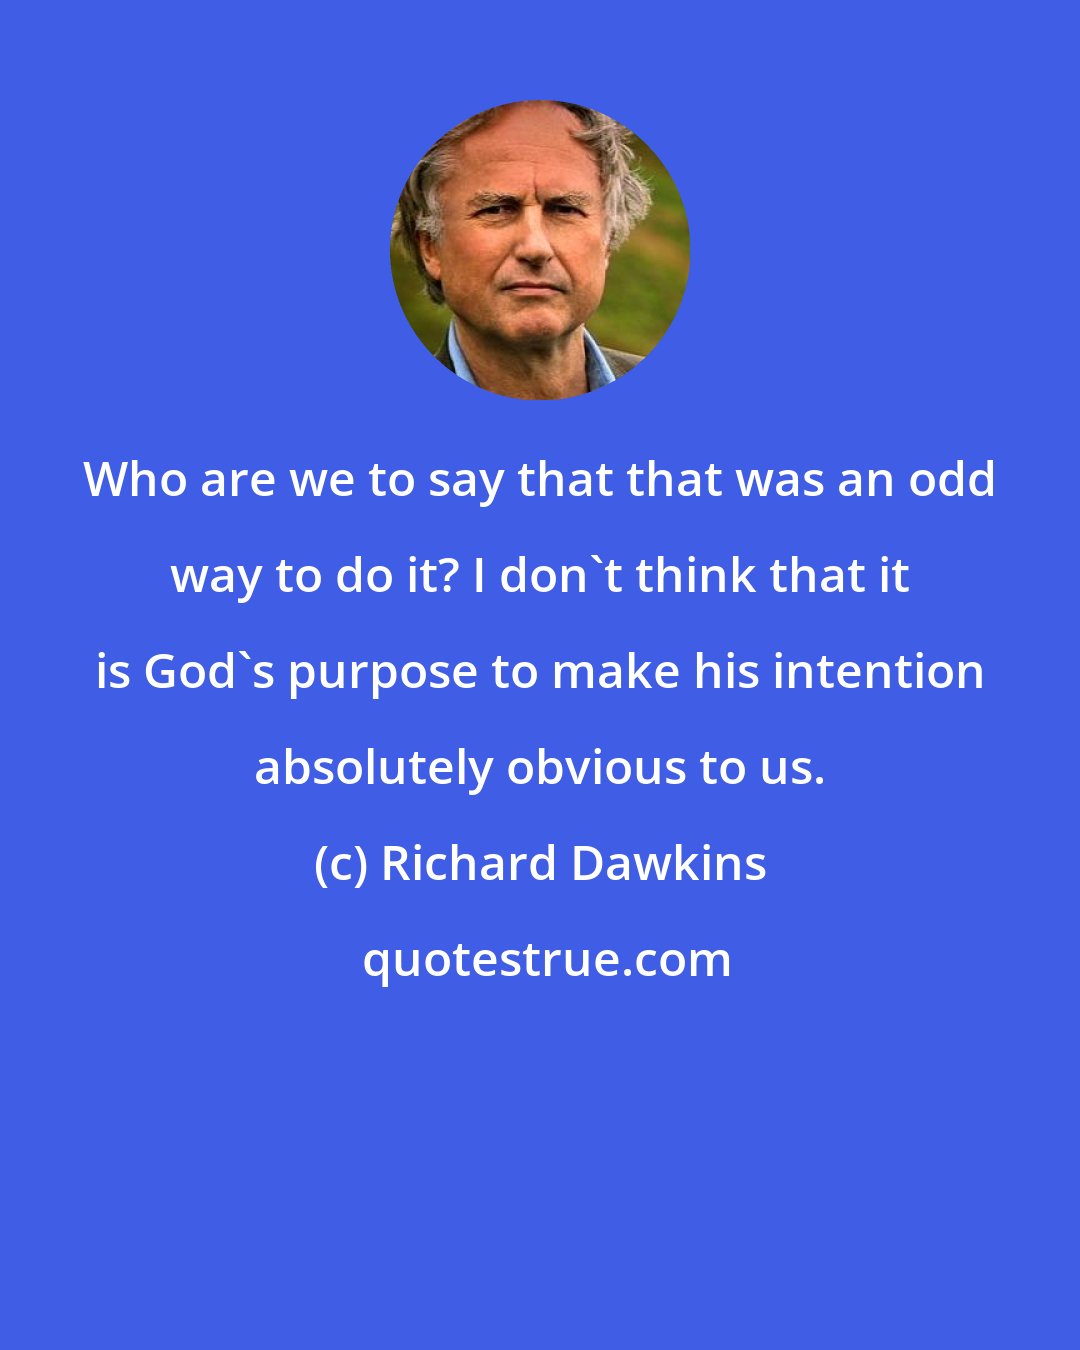 Richard Dawkins: Who are we to say that that was an odd way to do it? I don't think that it is God's purpose to make his intention absolutely obvious to us.